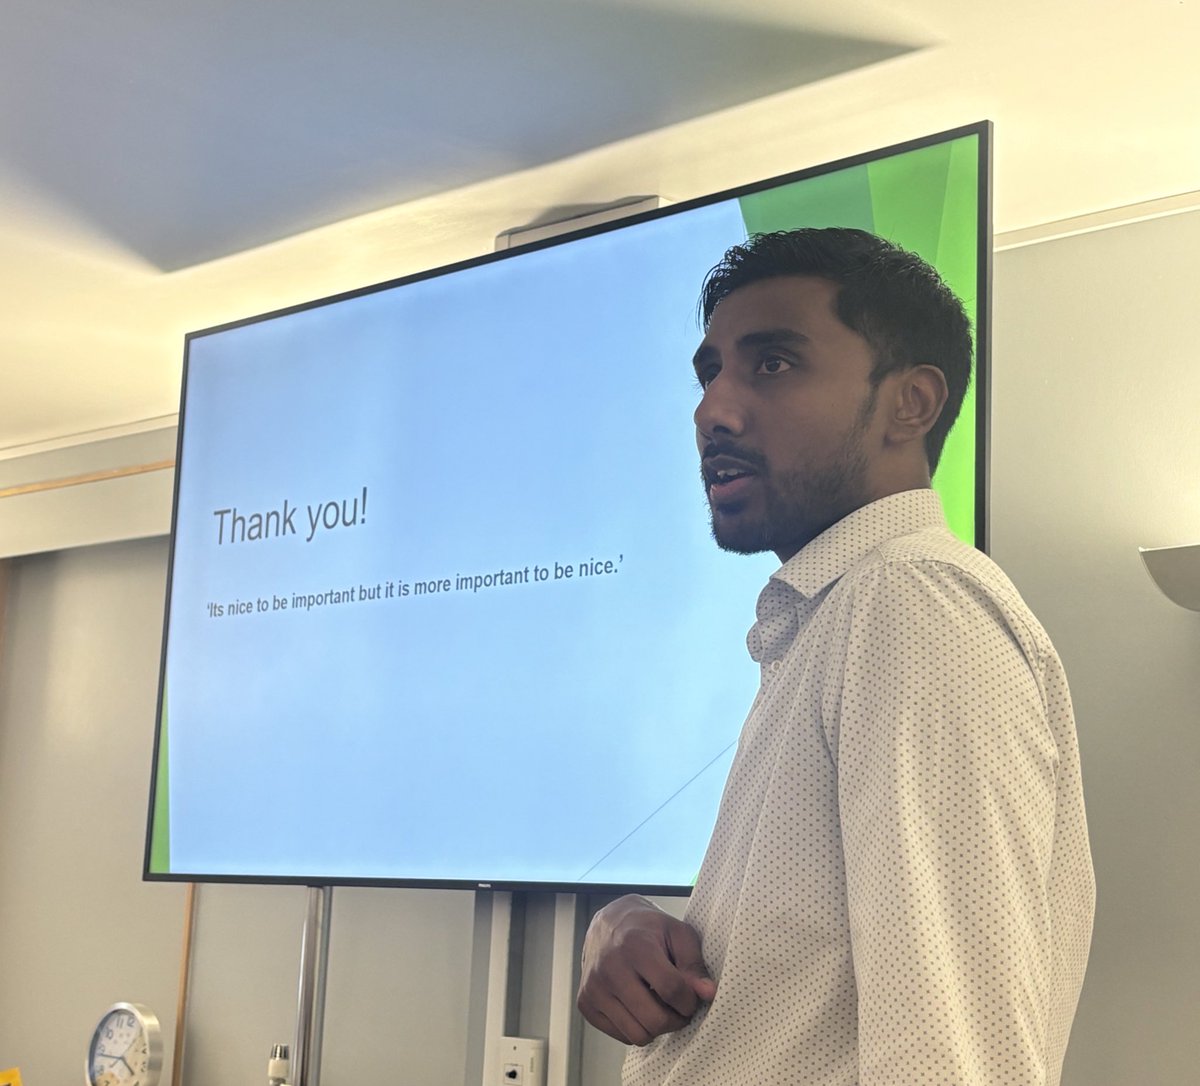 We had a great start to the #AHP Next Steps Programme today, finishing on a high note with @Vmurali1988 and the closing thought of “It’s nice to be important but it’s more important to be nice”
Thanks to todays speakers @TracyHull36 @CatrionaRiches @Vmurali1988 & @ElainePerrin77